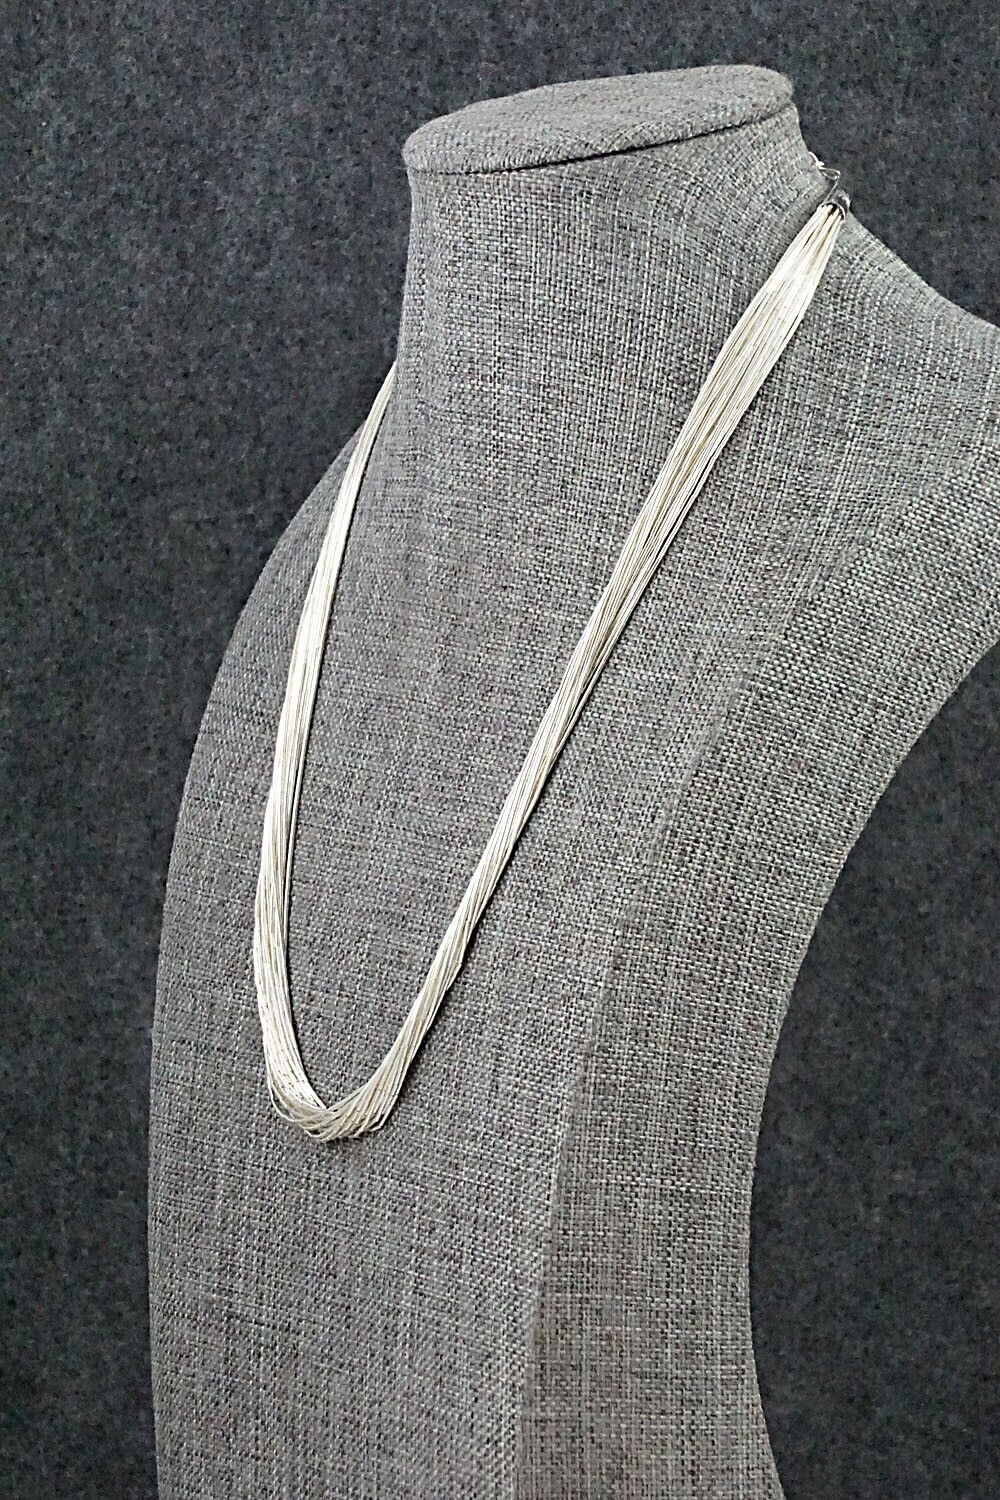 Liquid Silver Necklace - Sterling Silver 18"